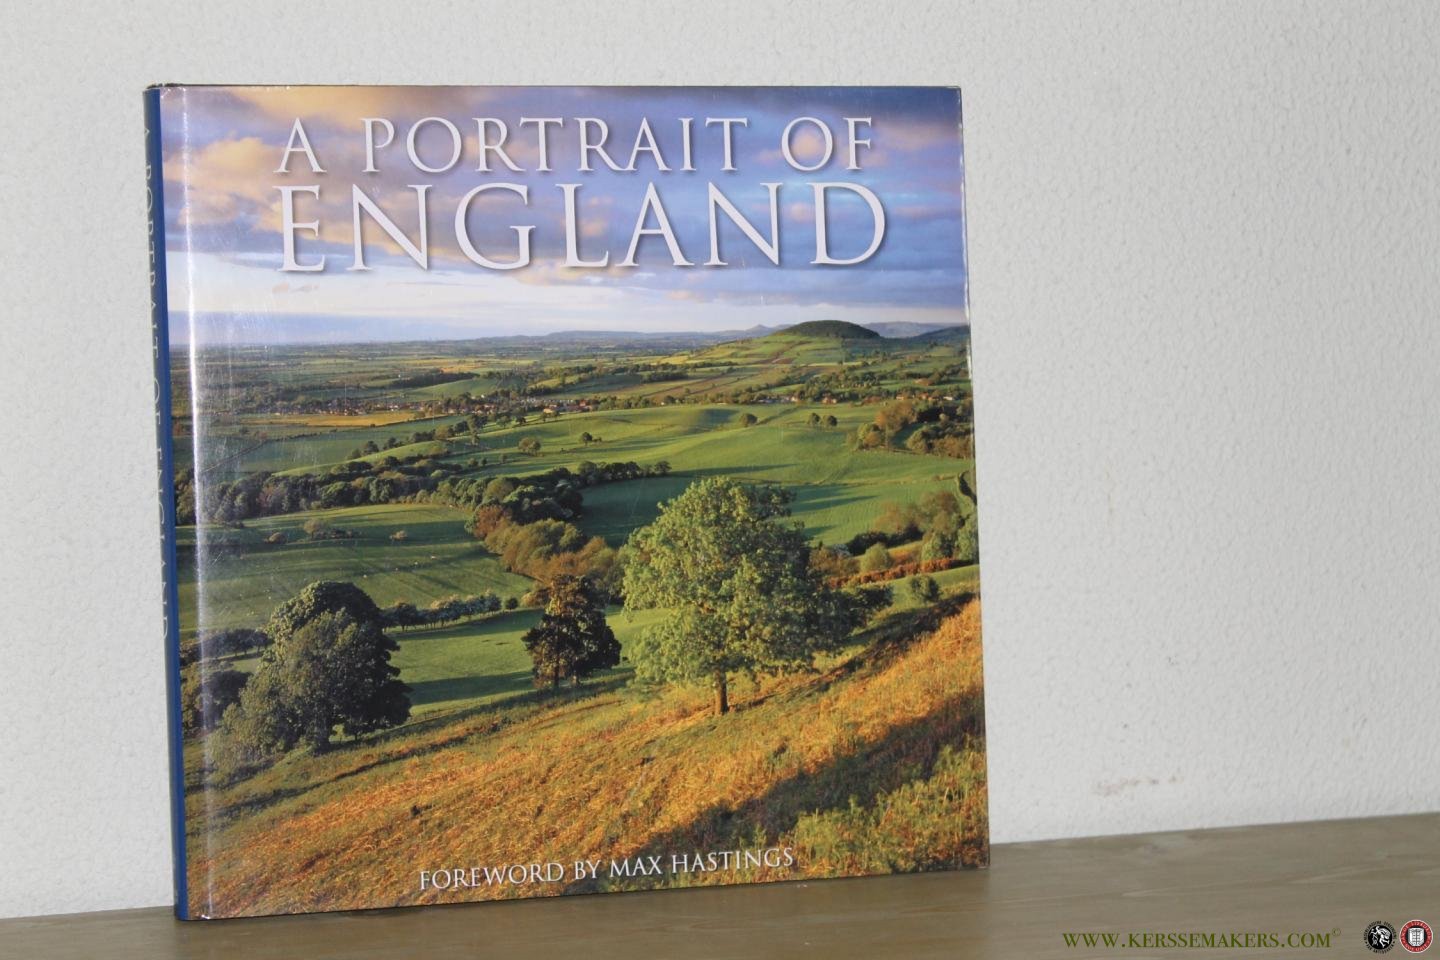 EEDE, Joanna (edited by) - Foreword by Max Hastings - A Portrait of England.